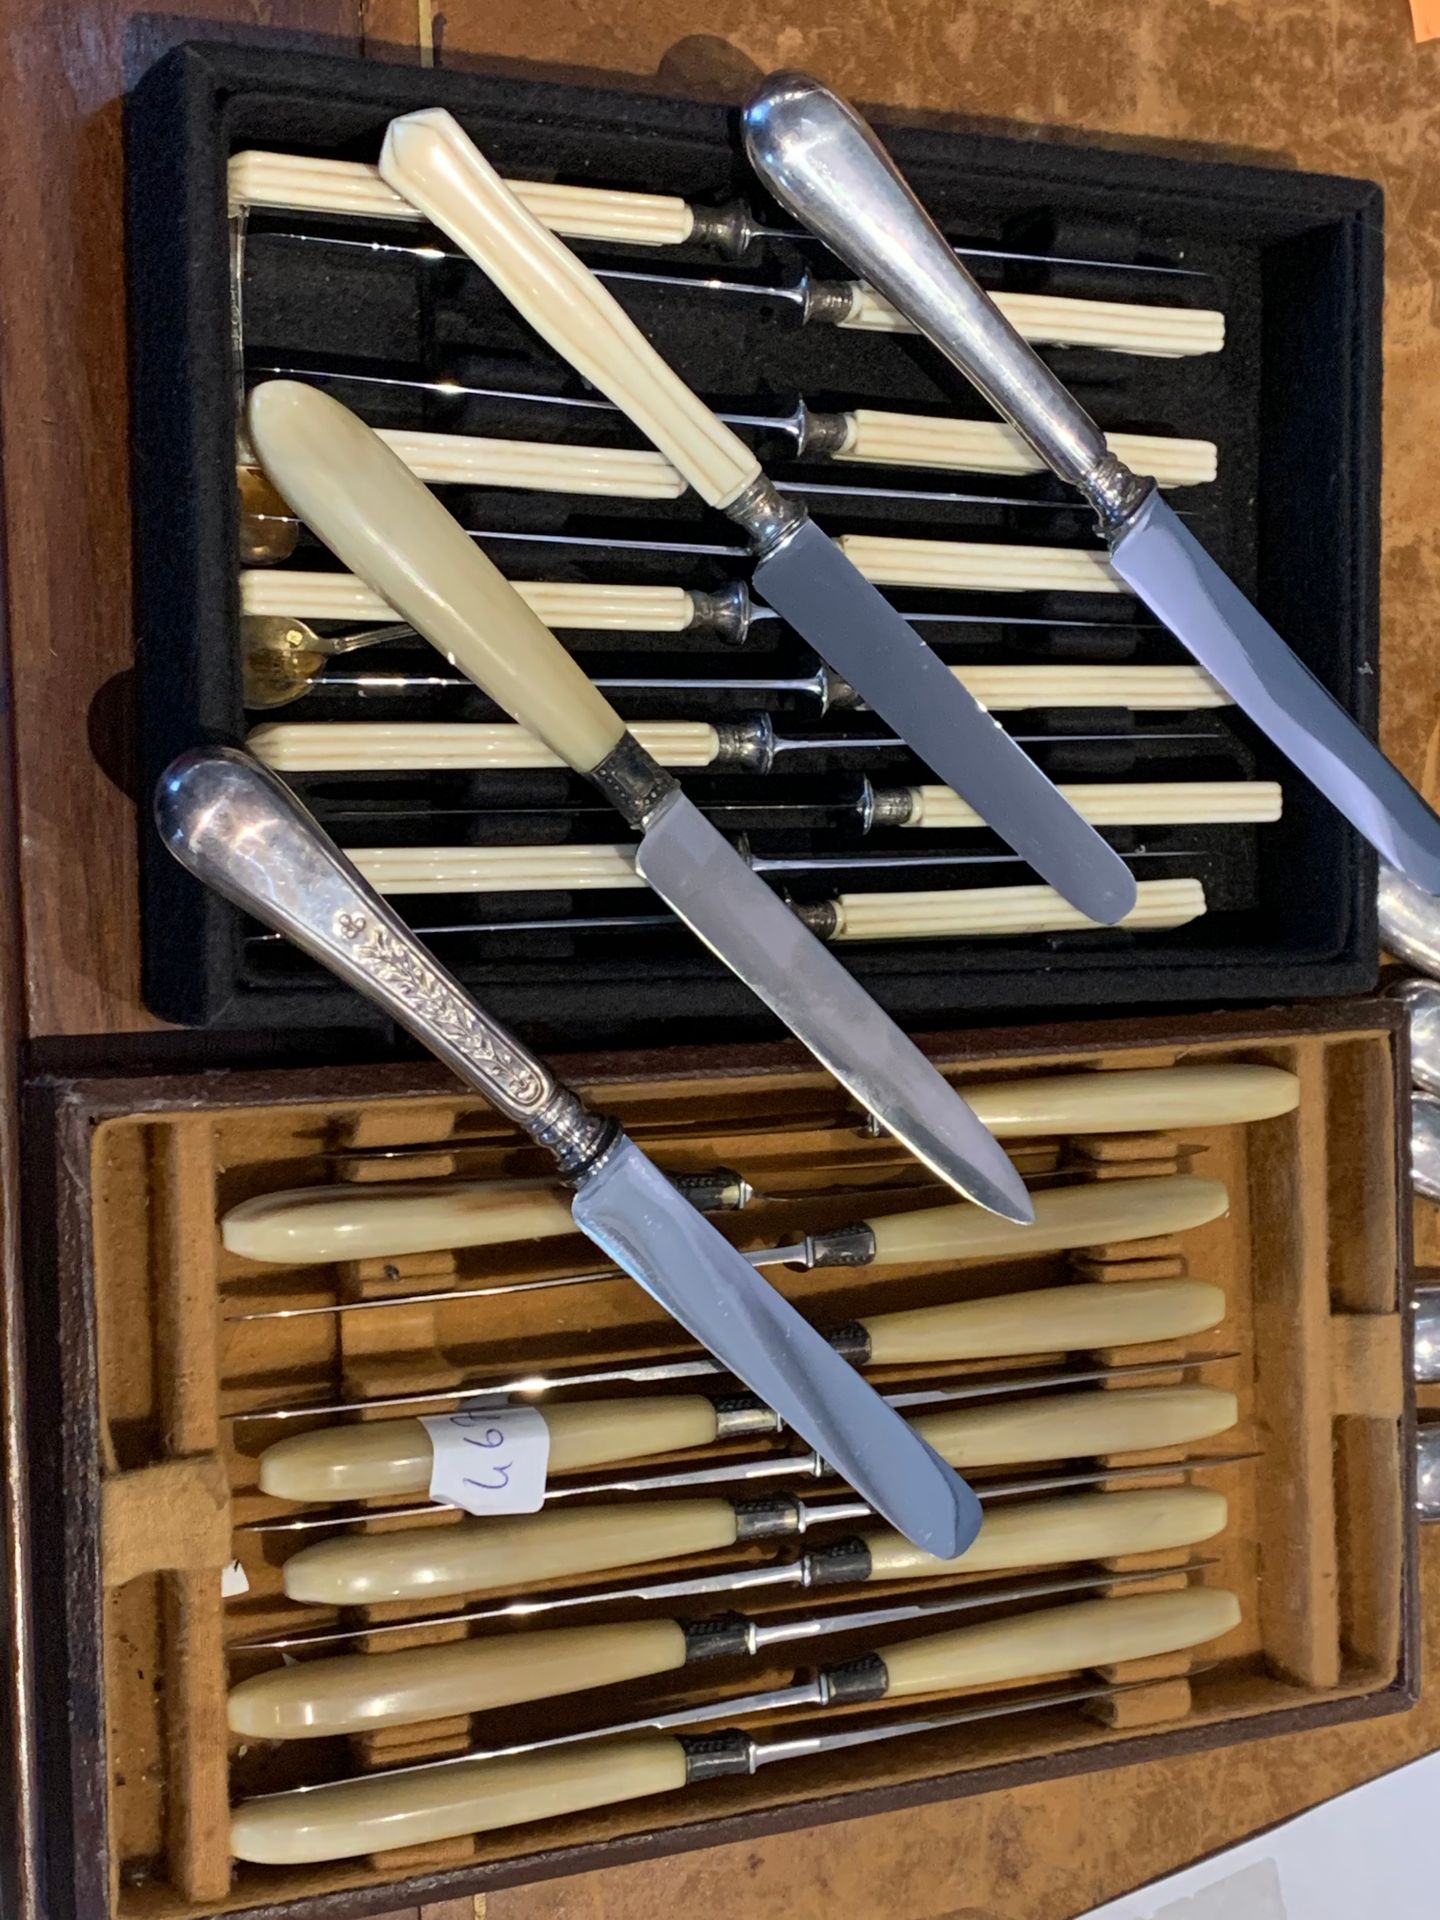 Null 
Set of small knives including 4 service parts